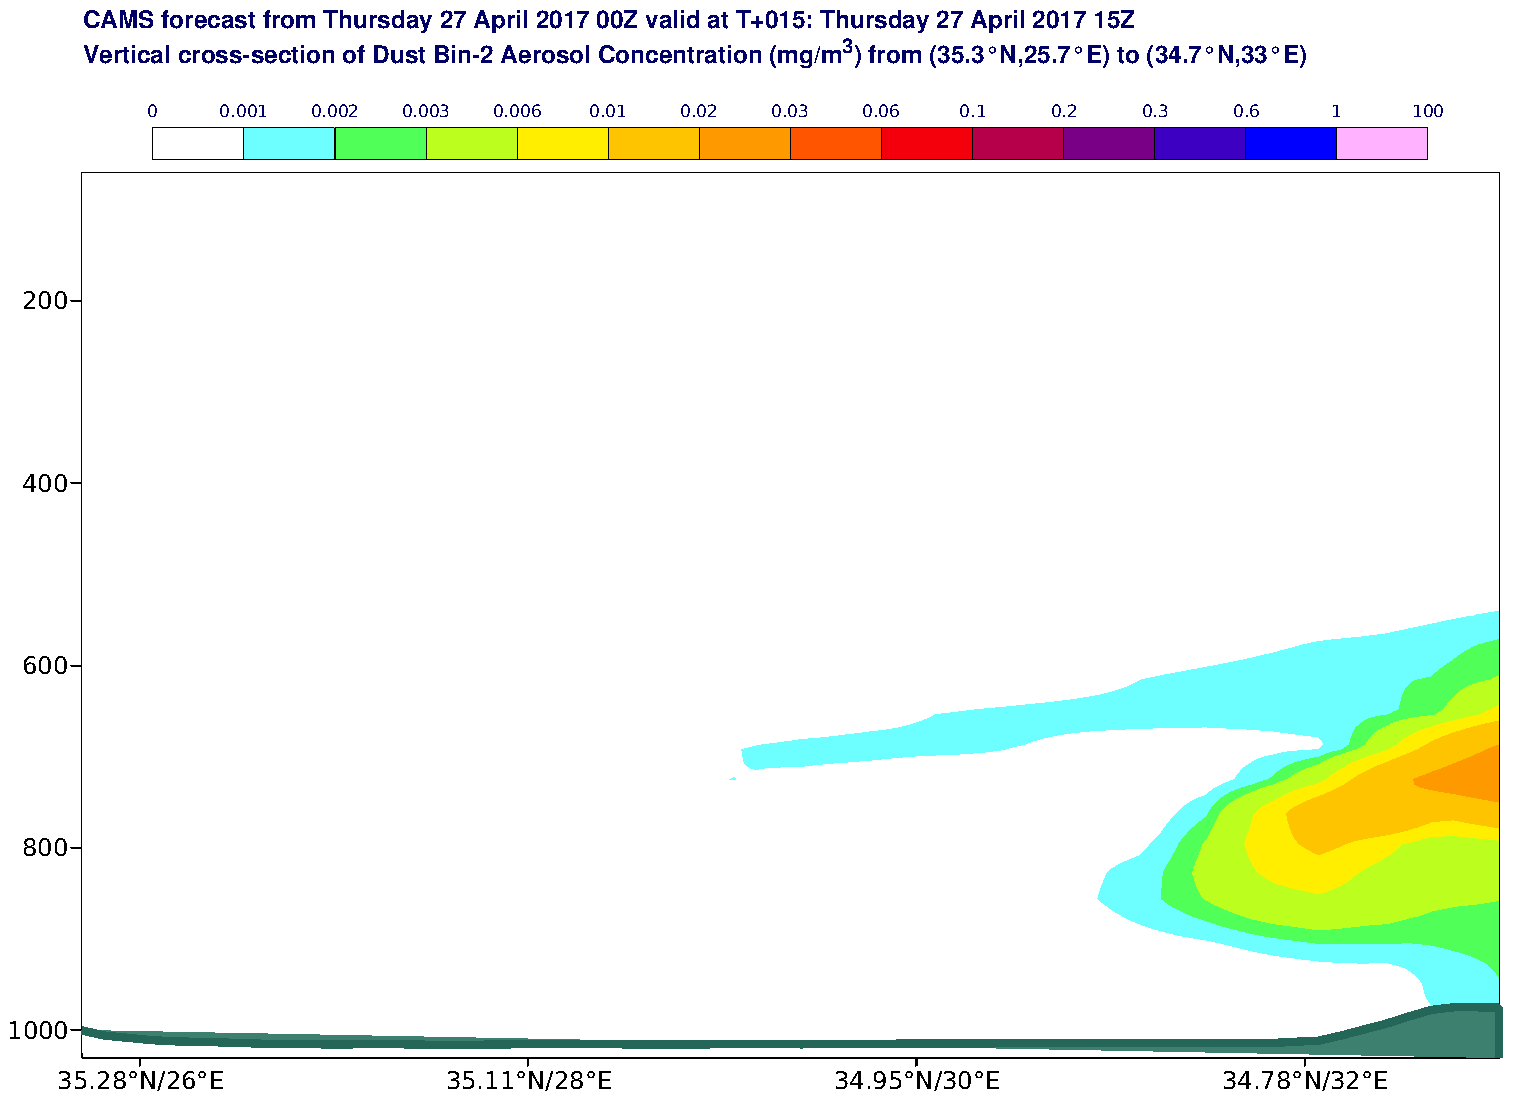 Vertical cross-section of Dust Bin-2 Aerosol Concentration (mg/m3) valid at T15 - 2017-04-27 15:00